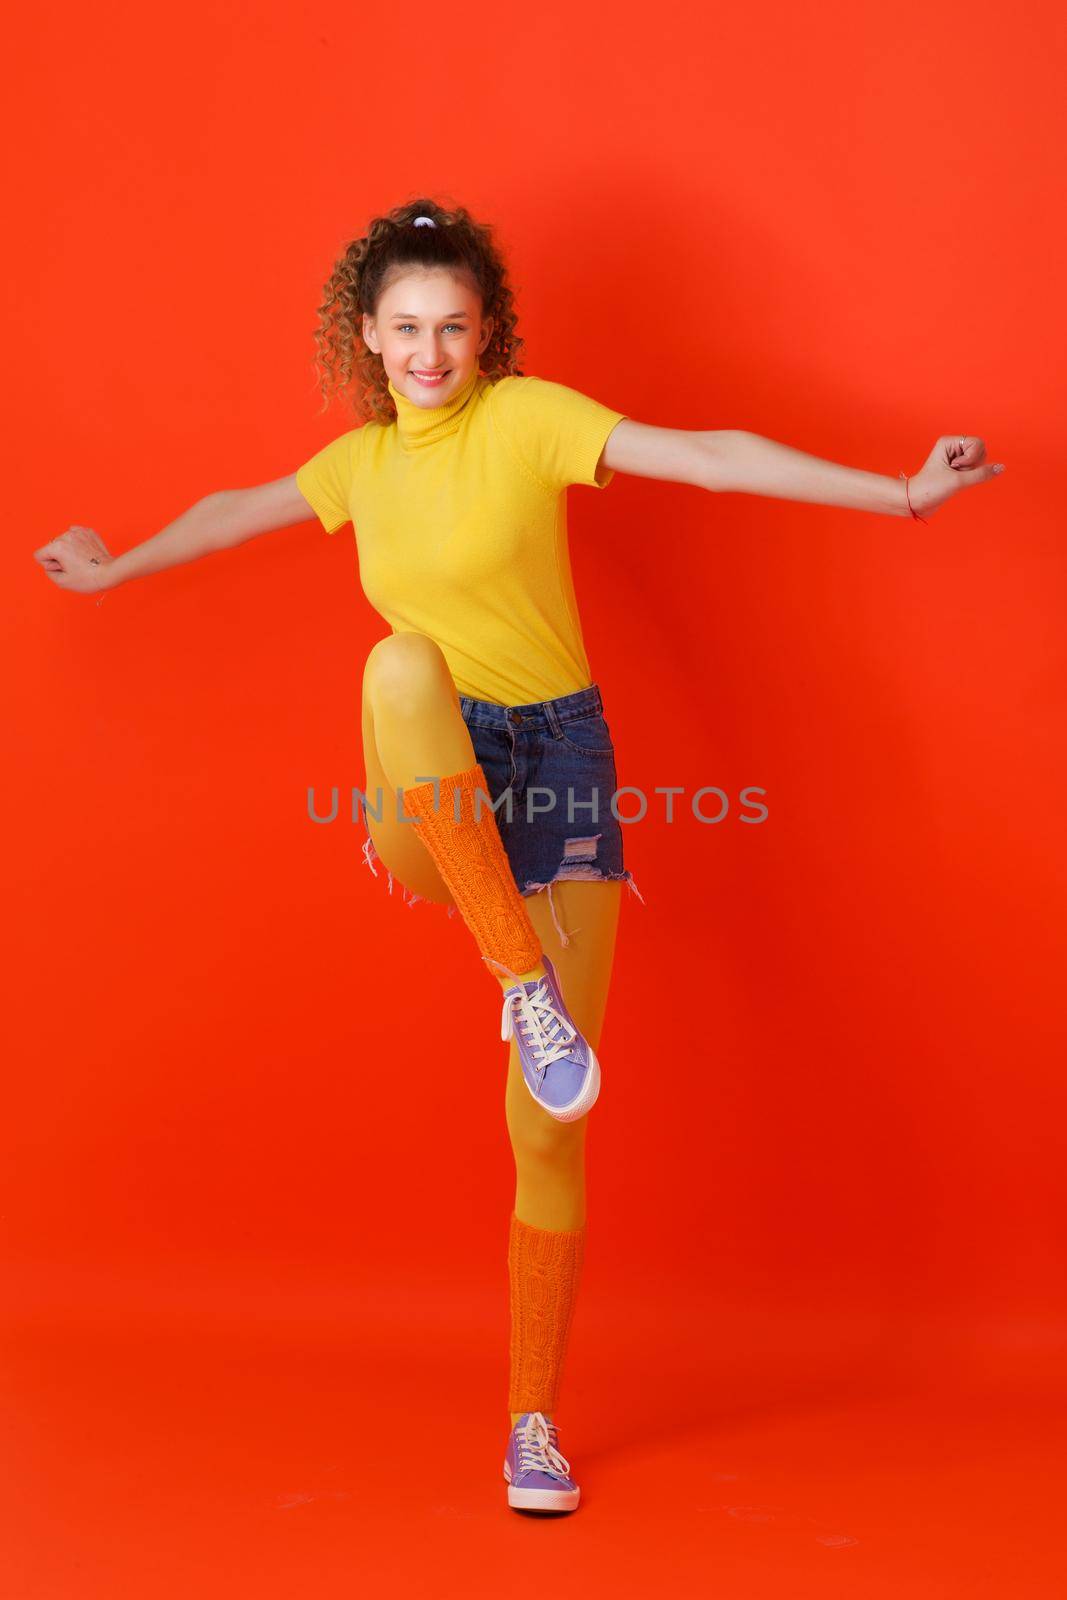 Girl in sports outfit jumping on one leg. Joyful girl with ponytail looking stylish in turtleneck blouse, leggins, shorts and socks gaiters jumping with her arms outstretched against red background